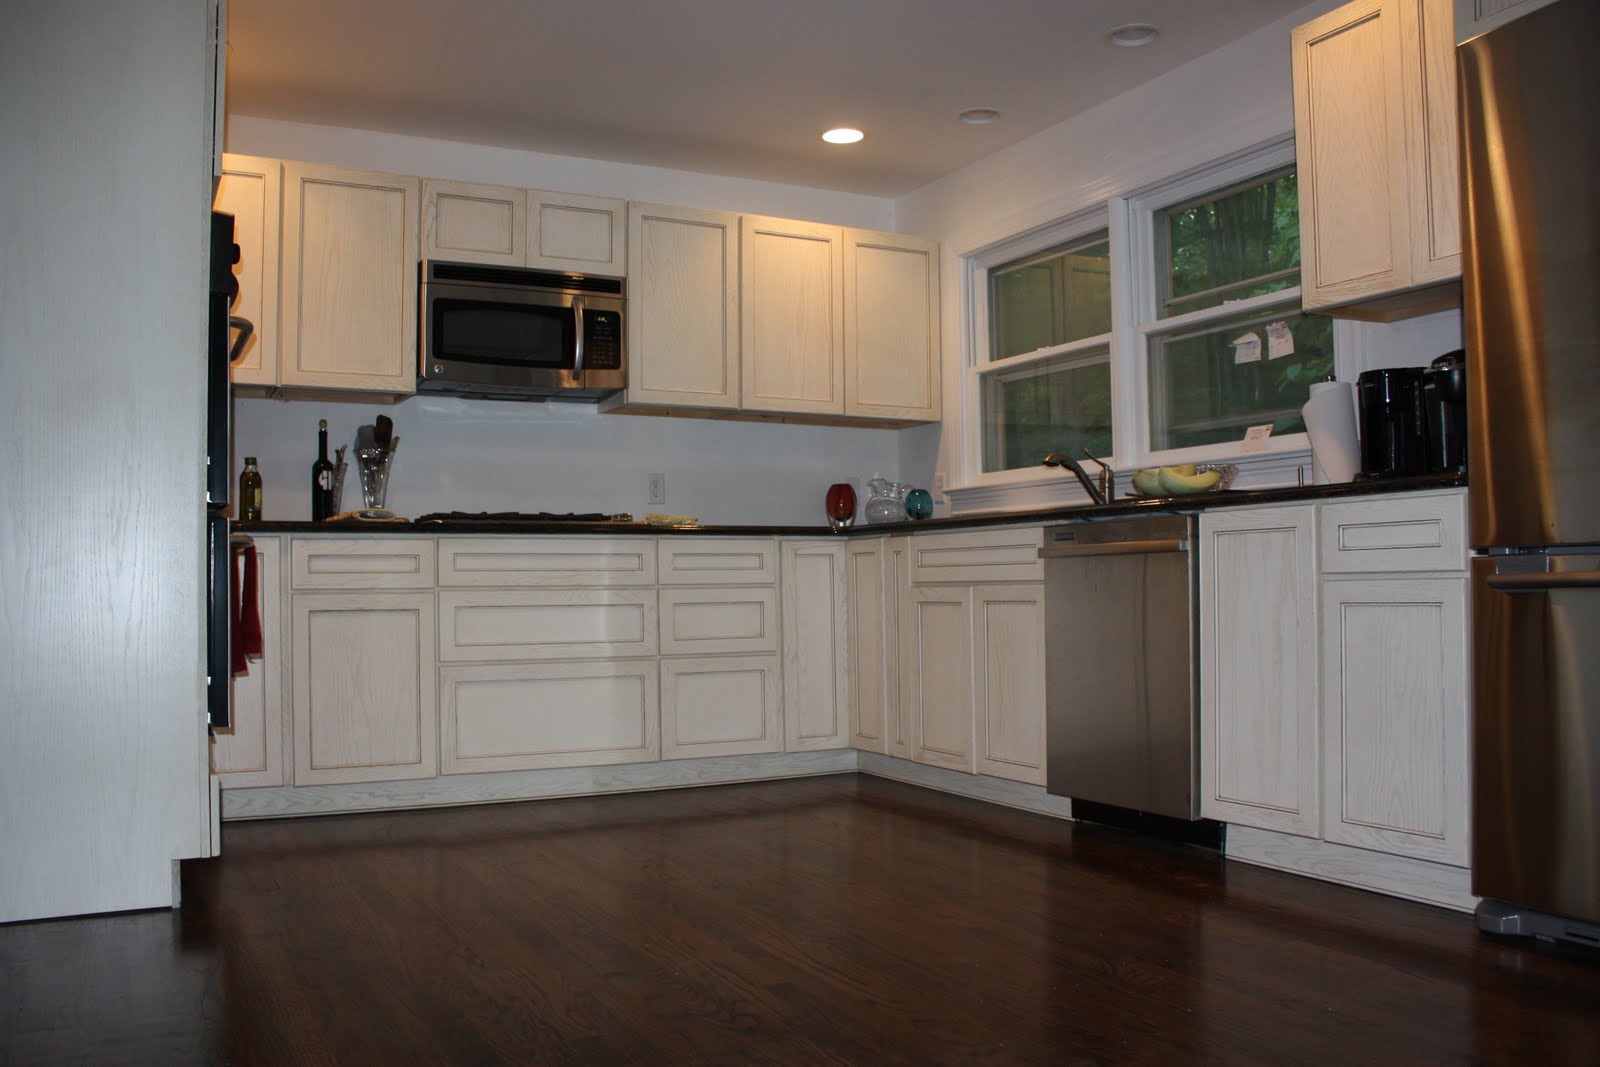 BARNA HOME RENOVATION: Kitchen is Painted / Trim is in